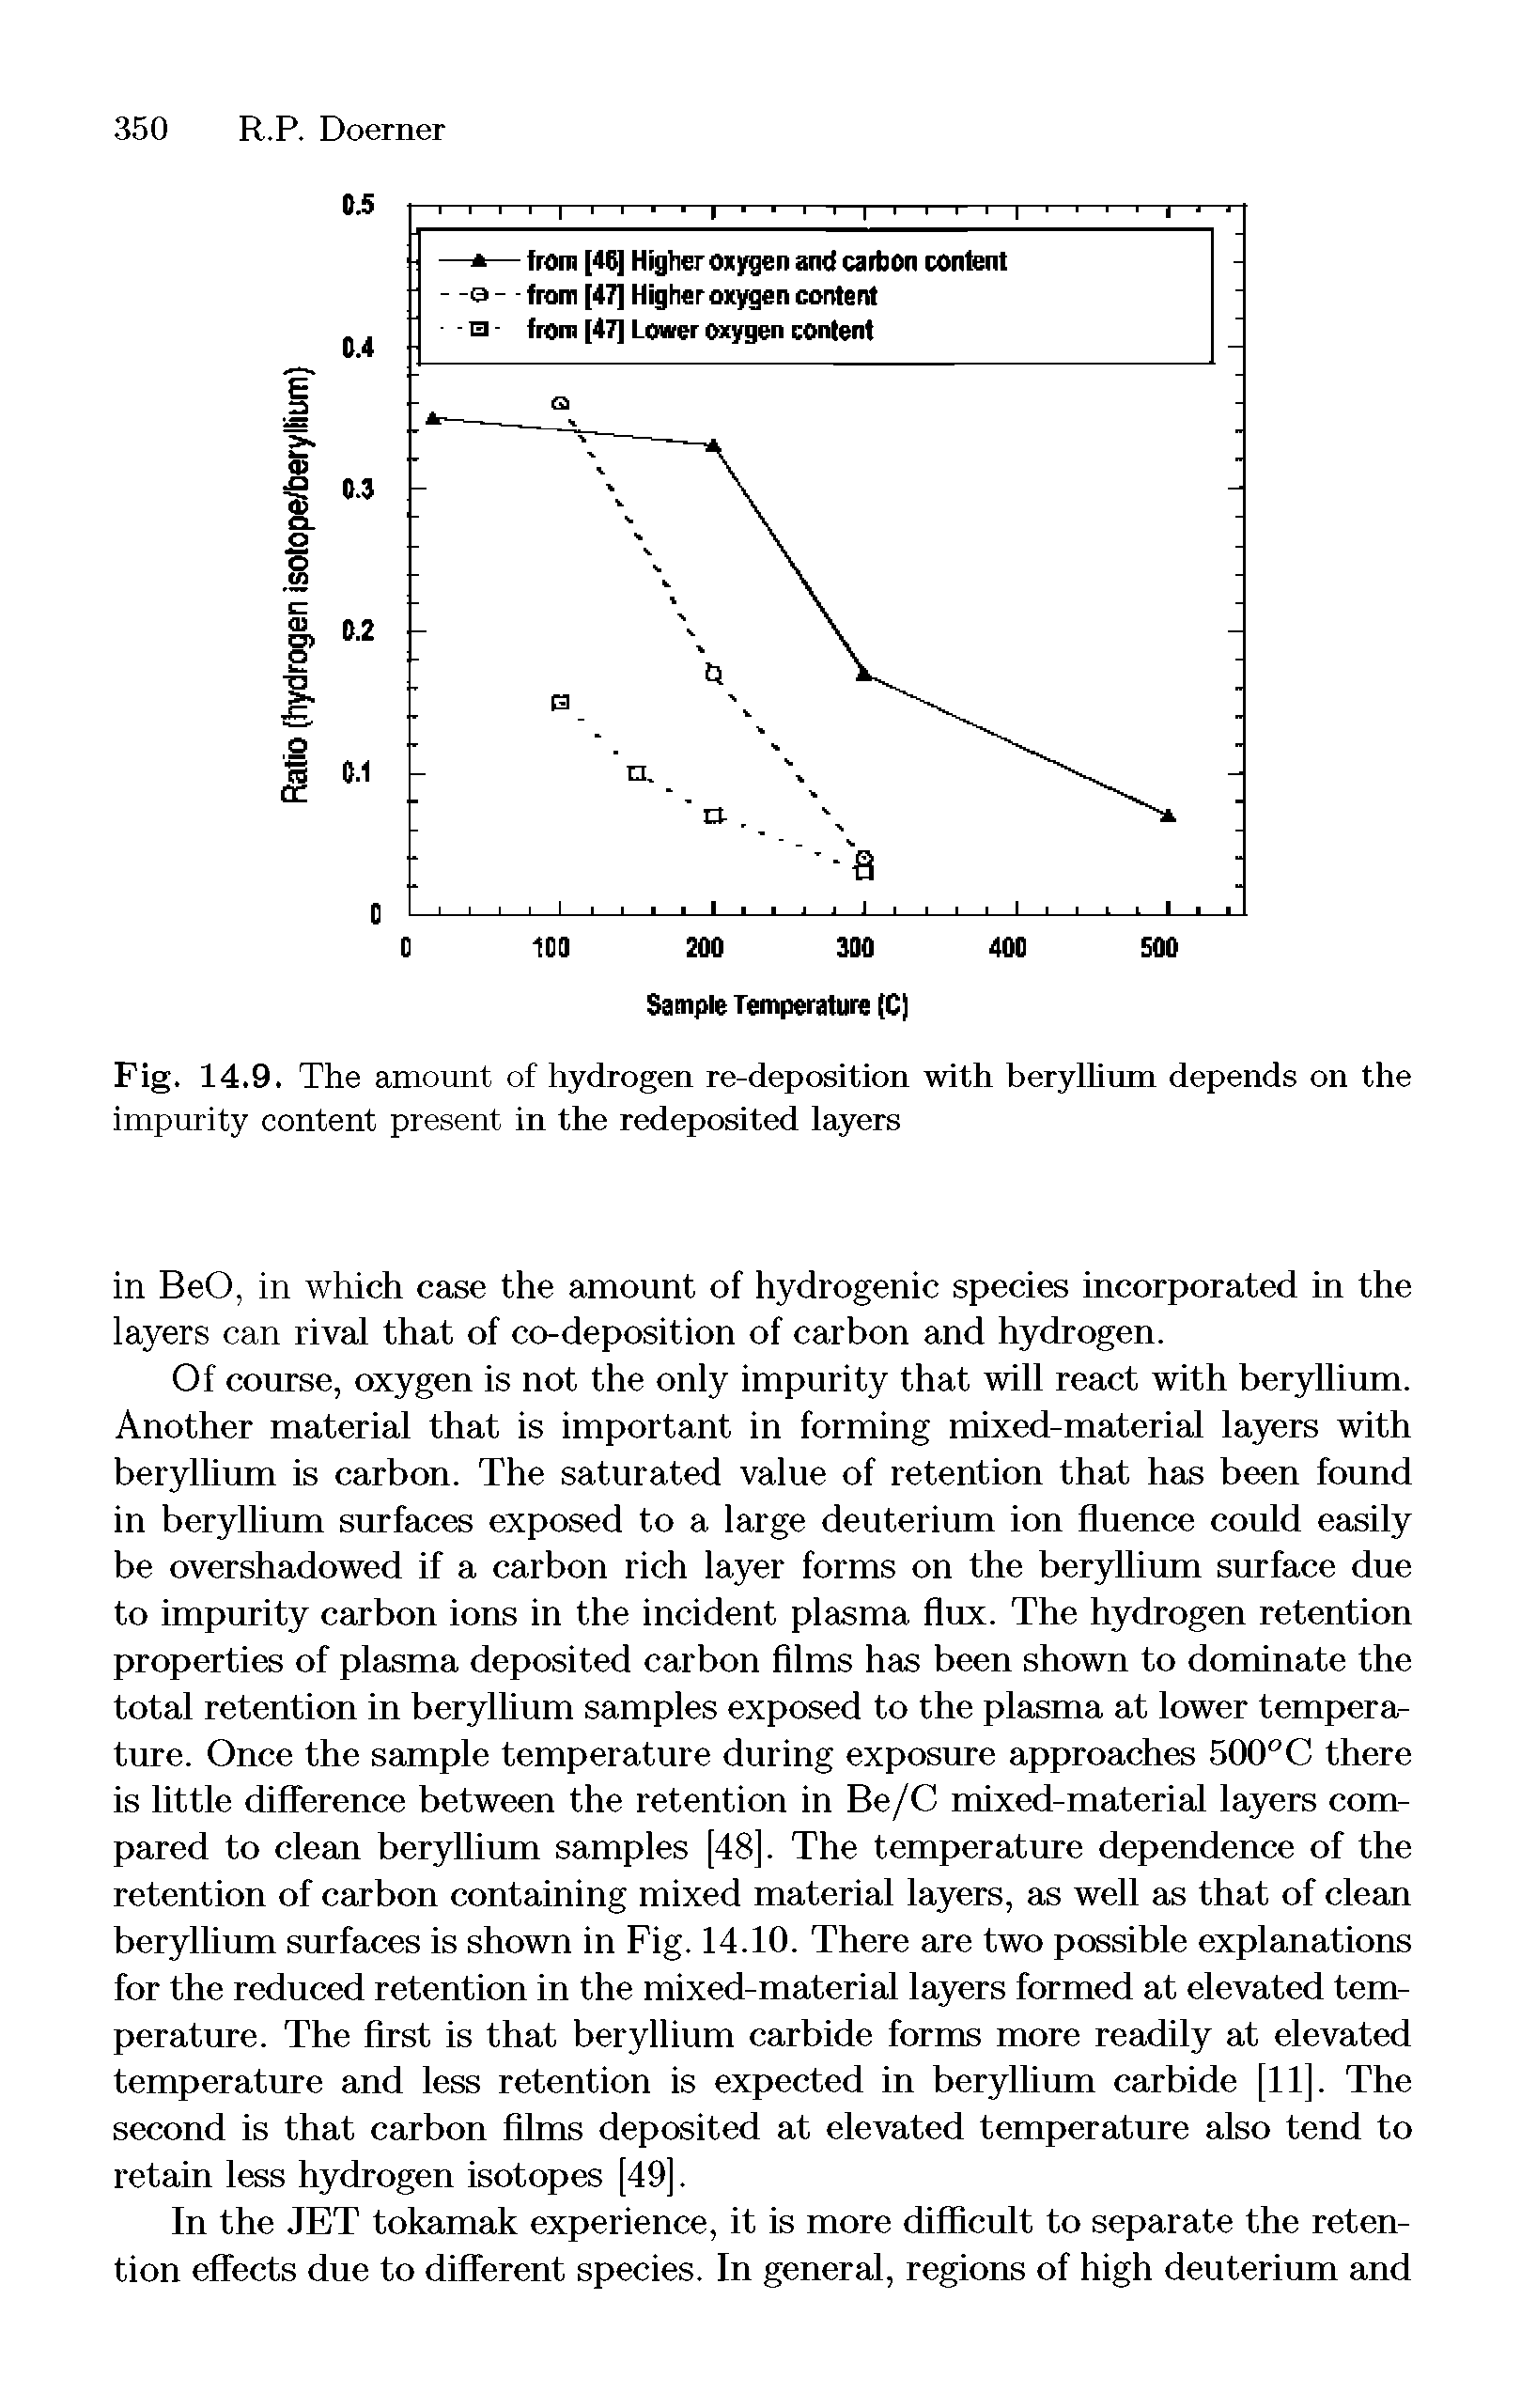 Fig. 14.9. The amount of hydrogen re-deposition with beryllium depends on the impurity content present in the redeposited layers...